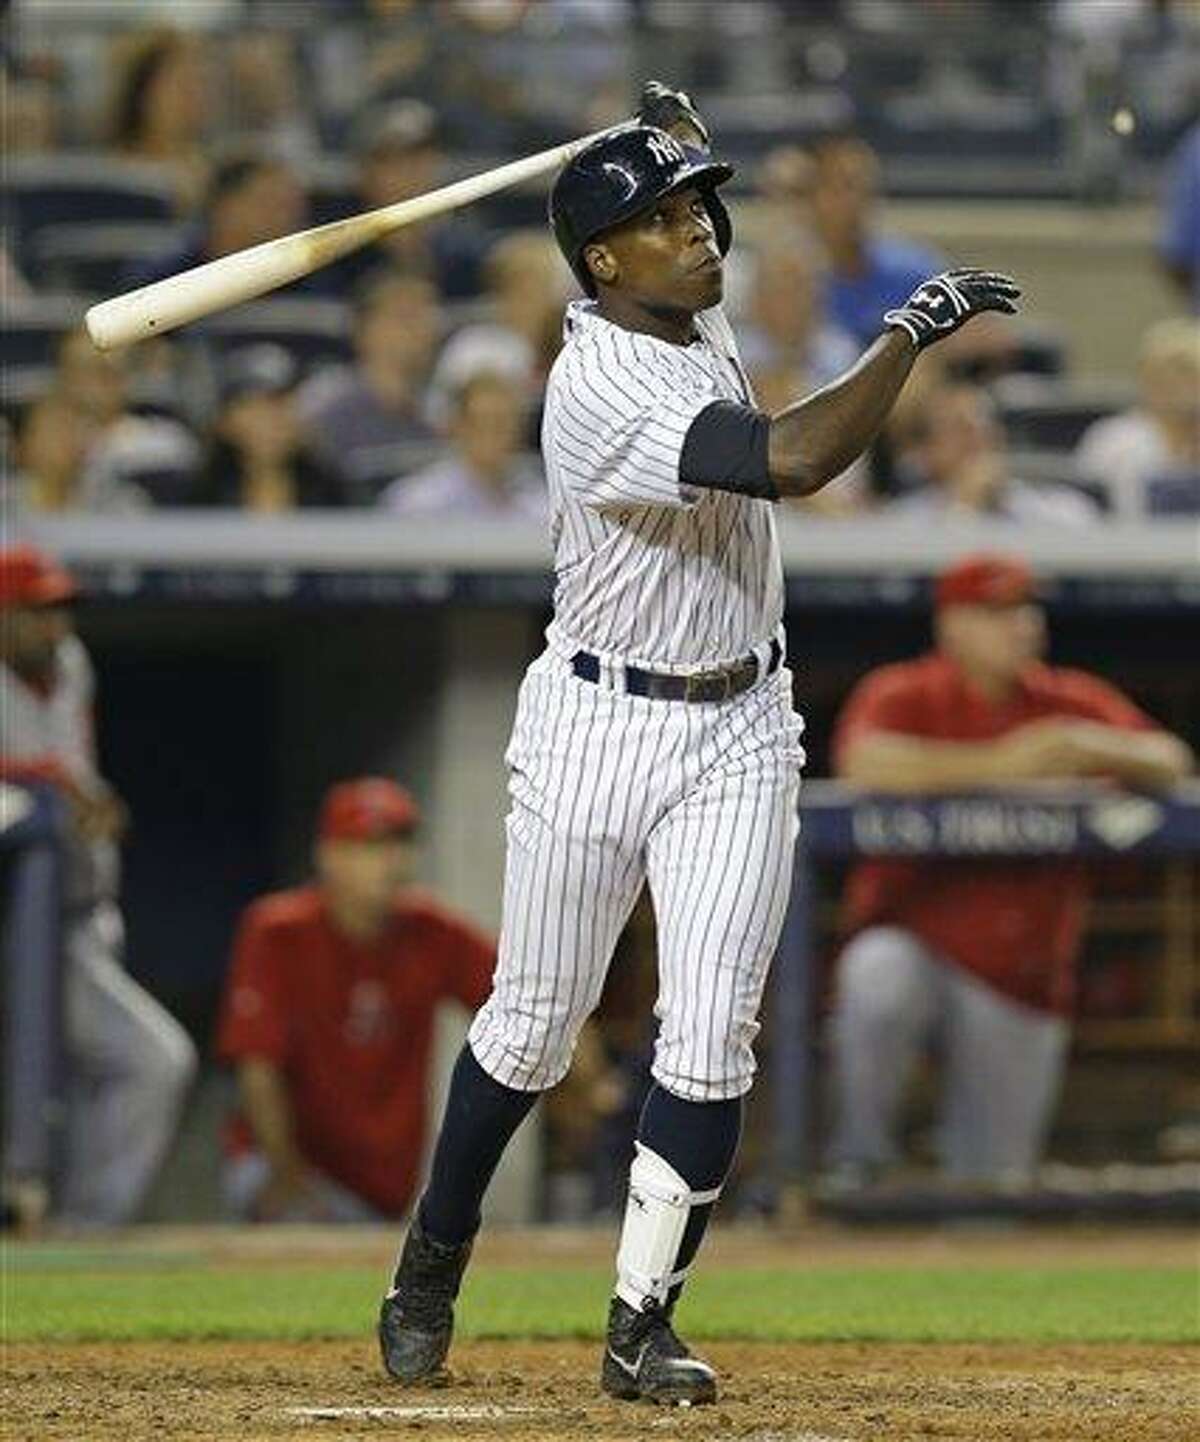 New York Yankees Alfonso Soriano follows through after hitting a seventh-inning, three-run home run in a baseball game against the Los Angeles Angels, Tuesday, Aug. 13, 2013, in New York. It was Soriano's second home run of the game. He also hit a fifth-inning, two-run home run. (AP Photo/Kathy Willens)